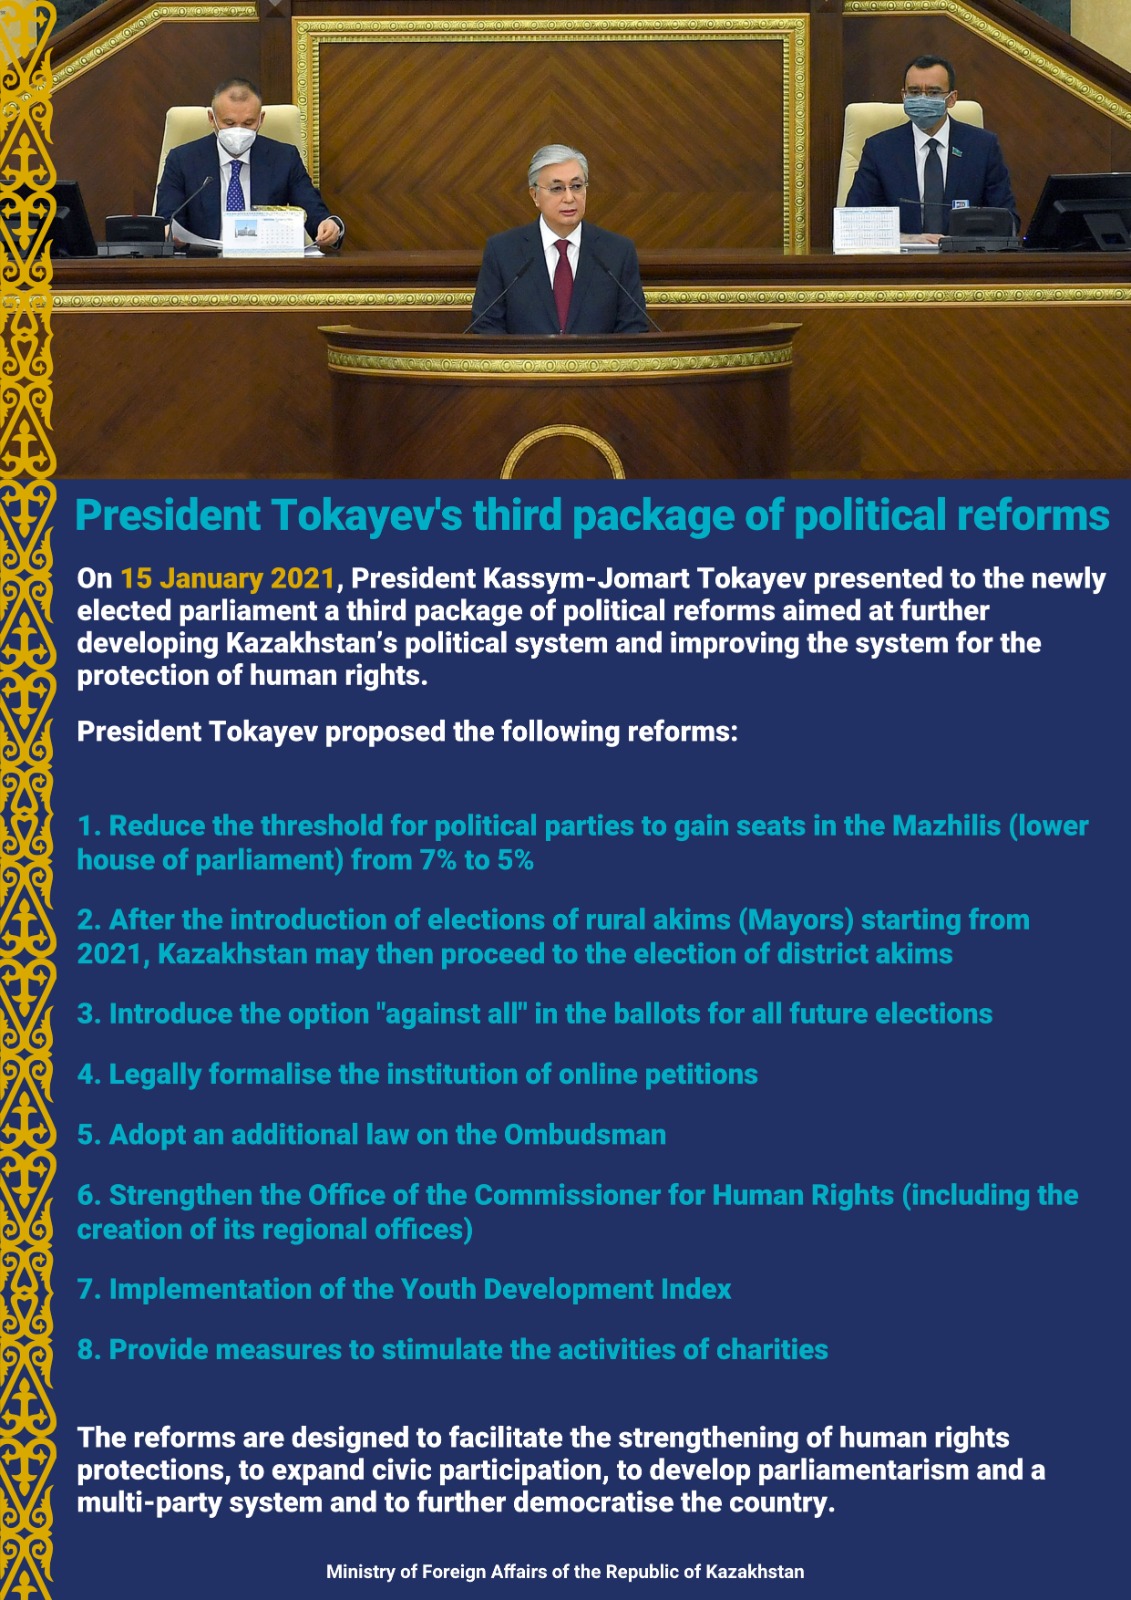 Statement by President Kassym-Jomart Tokayev at the opening of the first session of the Parliament of the Republic of Kazakhstan  of the seventh convocation